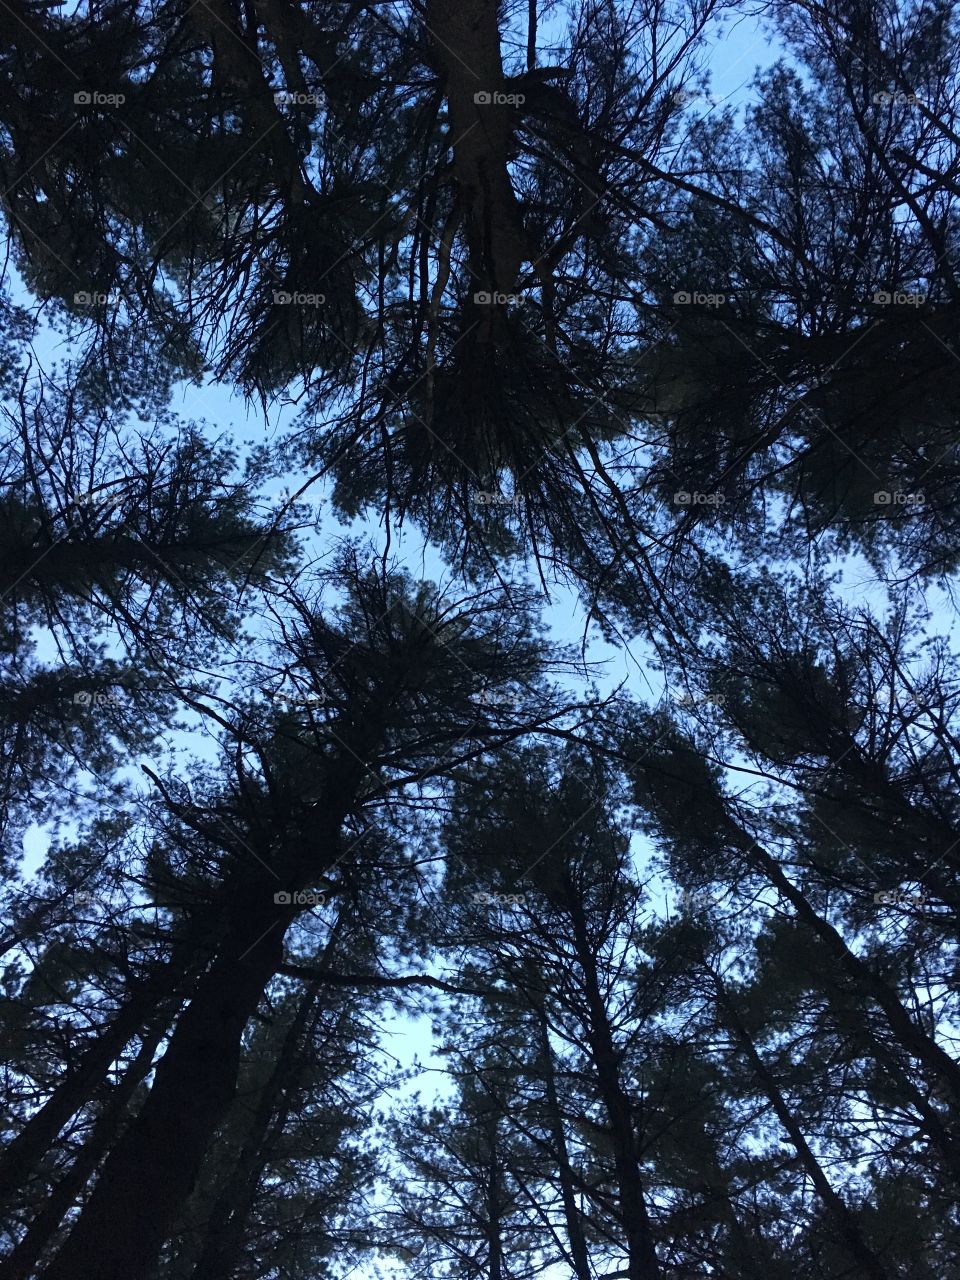 Looking up through the trees trying to find the sky